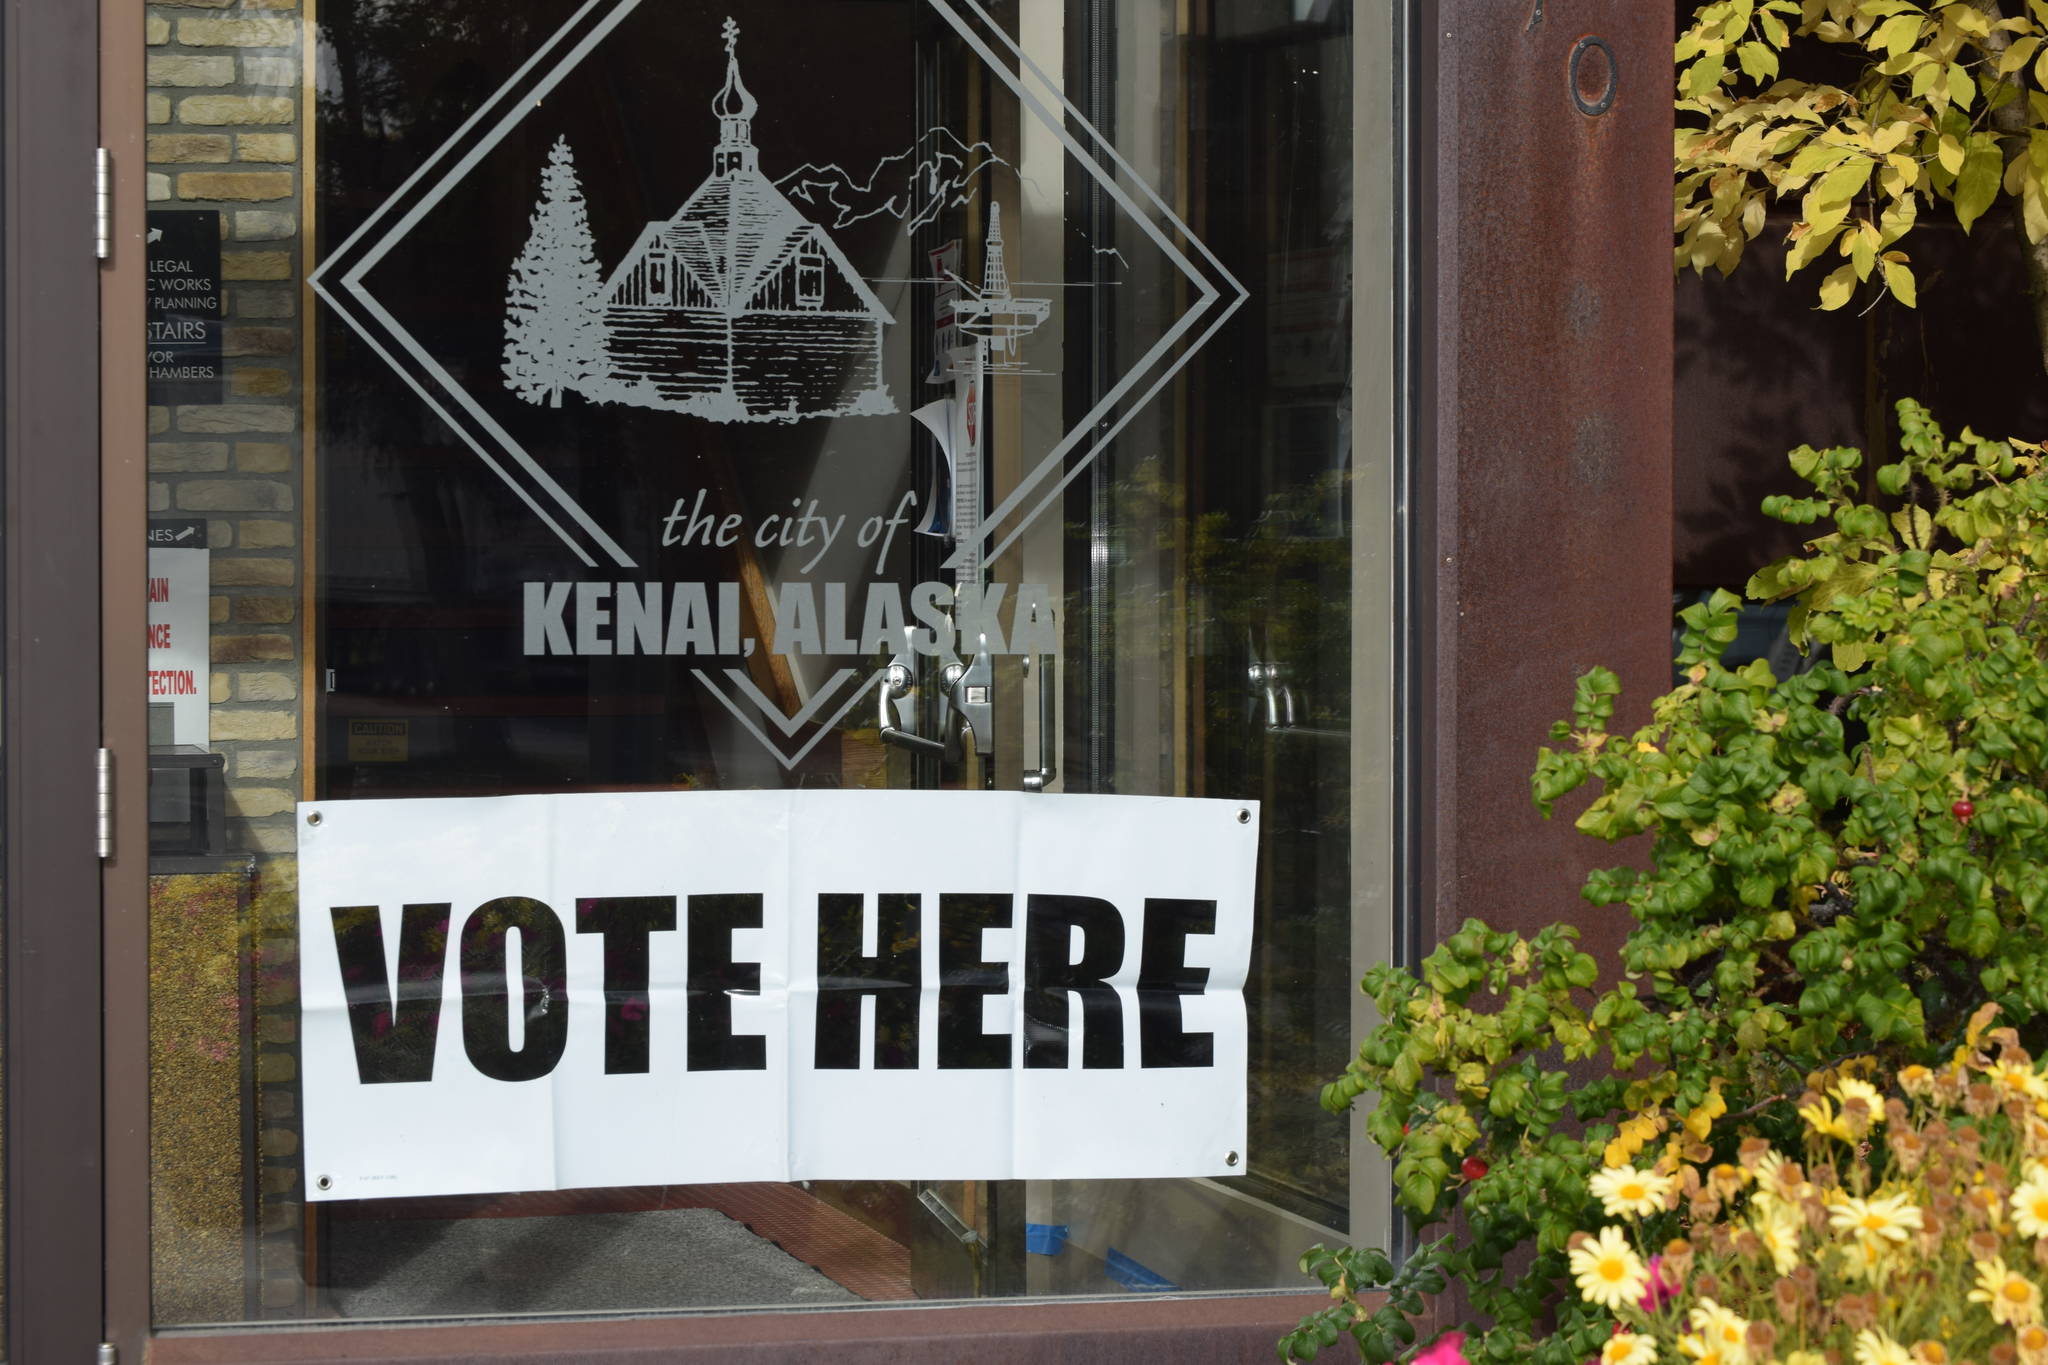 A “Vote Here” sign is seen at the City of Kenai building on Monday, Sept. 21, in Kenai.